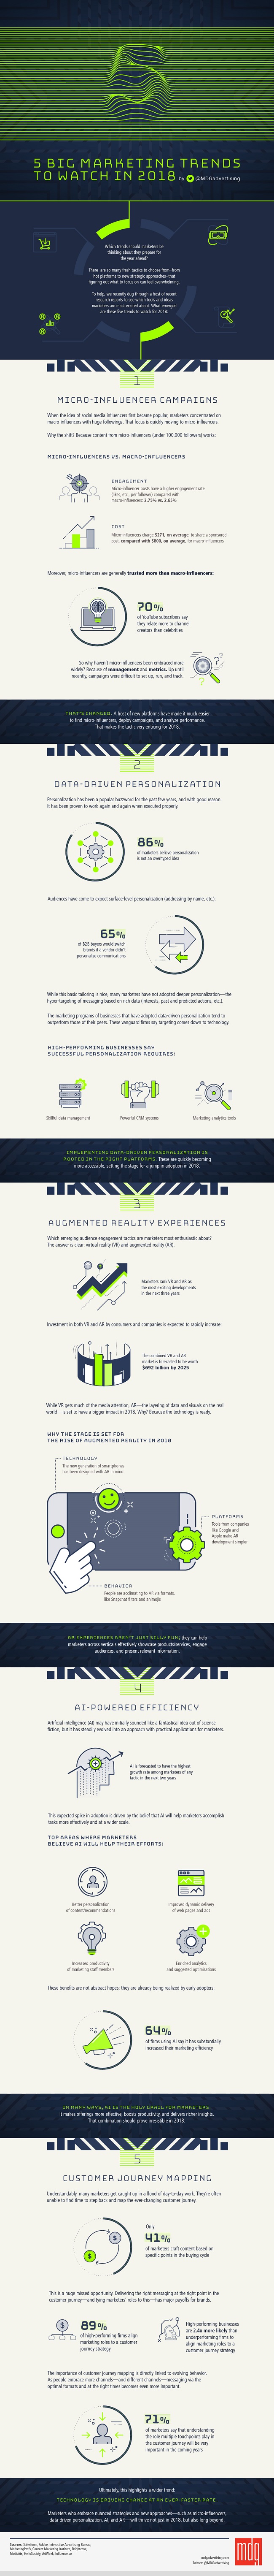 5_big_marketing_trends_to_watch_in_2018_infographic.png